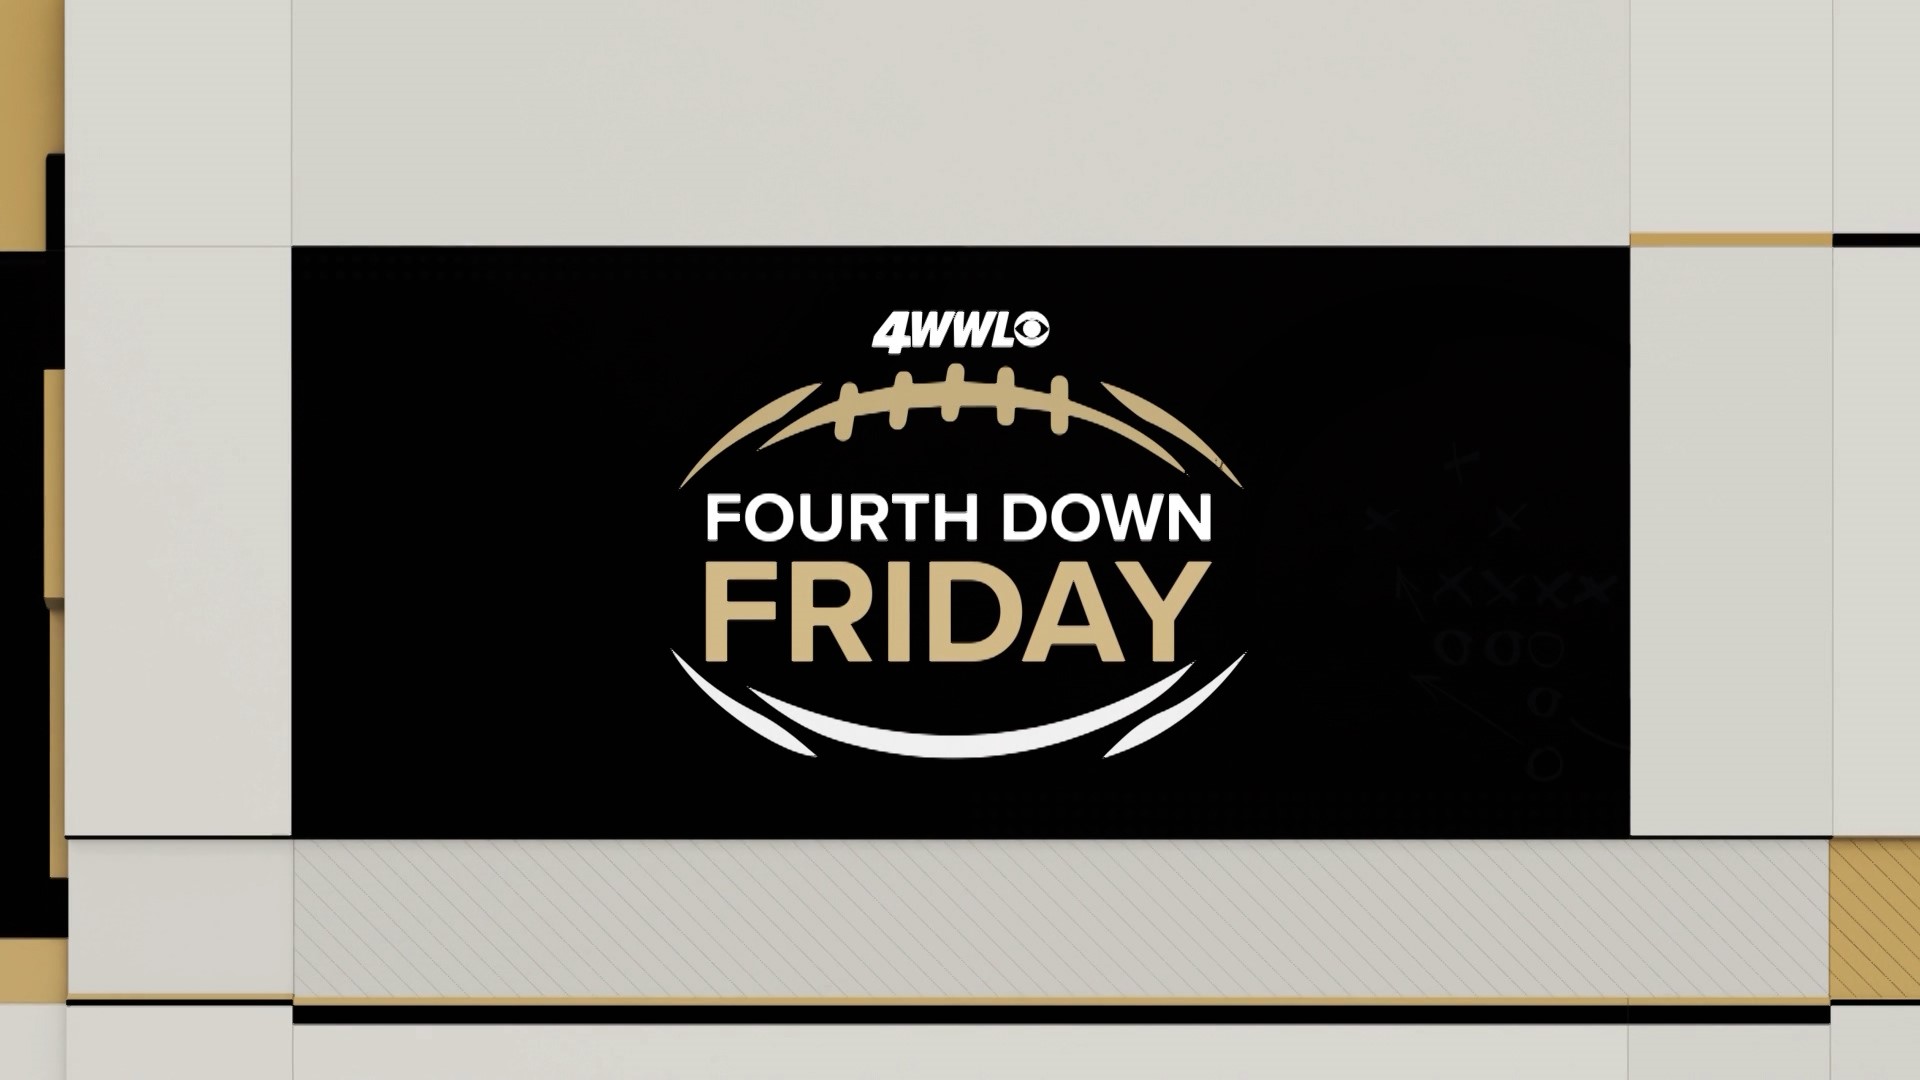 WWL-TV's Ricardo LeCompte takes a look at the top highlights from around the New Orleans-area prep football scene on Week 3 of Fourth Down Friday, Sept. 15, 2023.